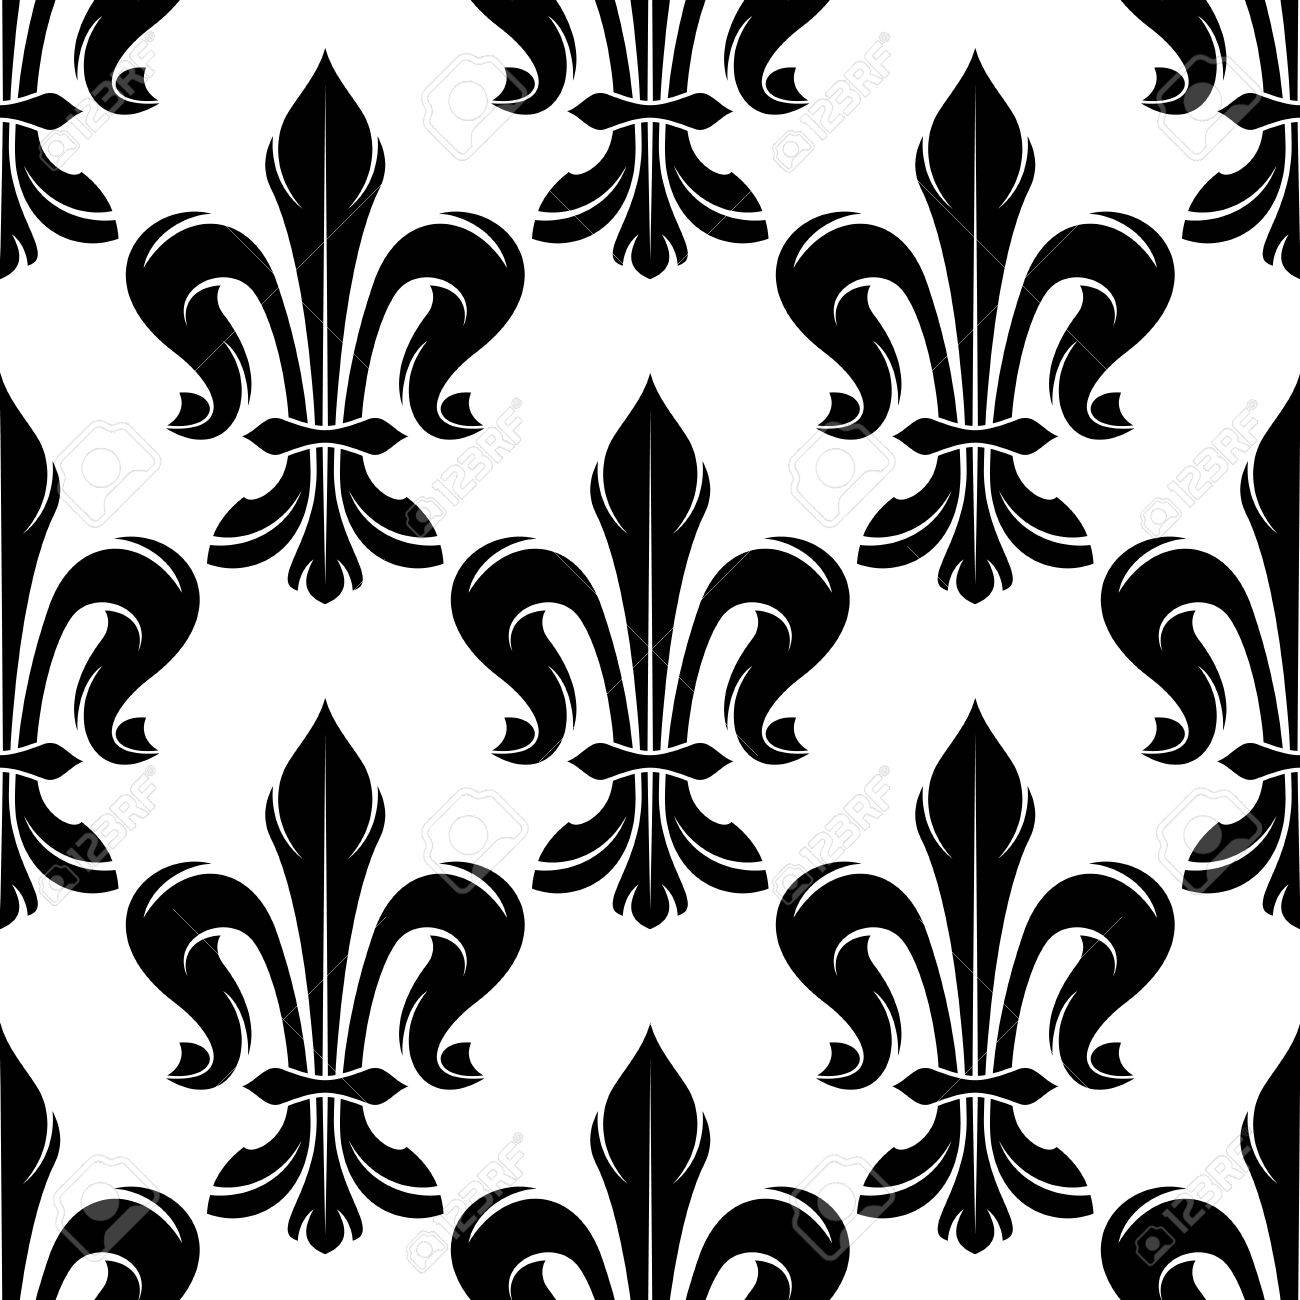 Seamless Black And White Fleur De Lis Pattern With Elegant Curled